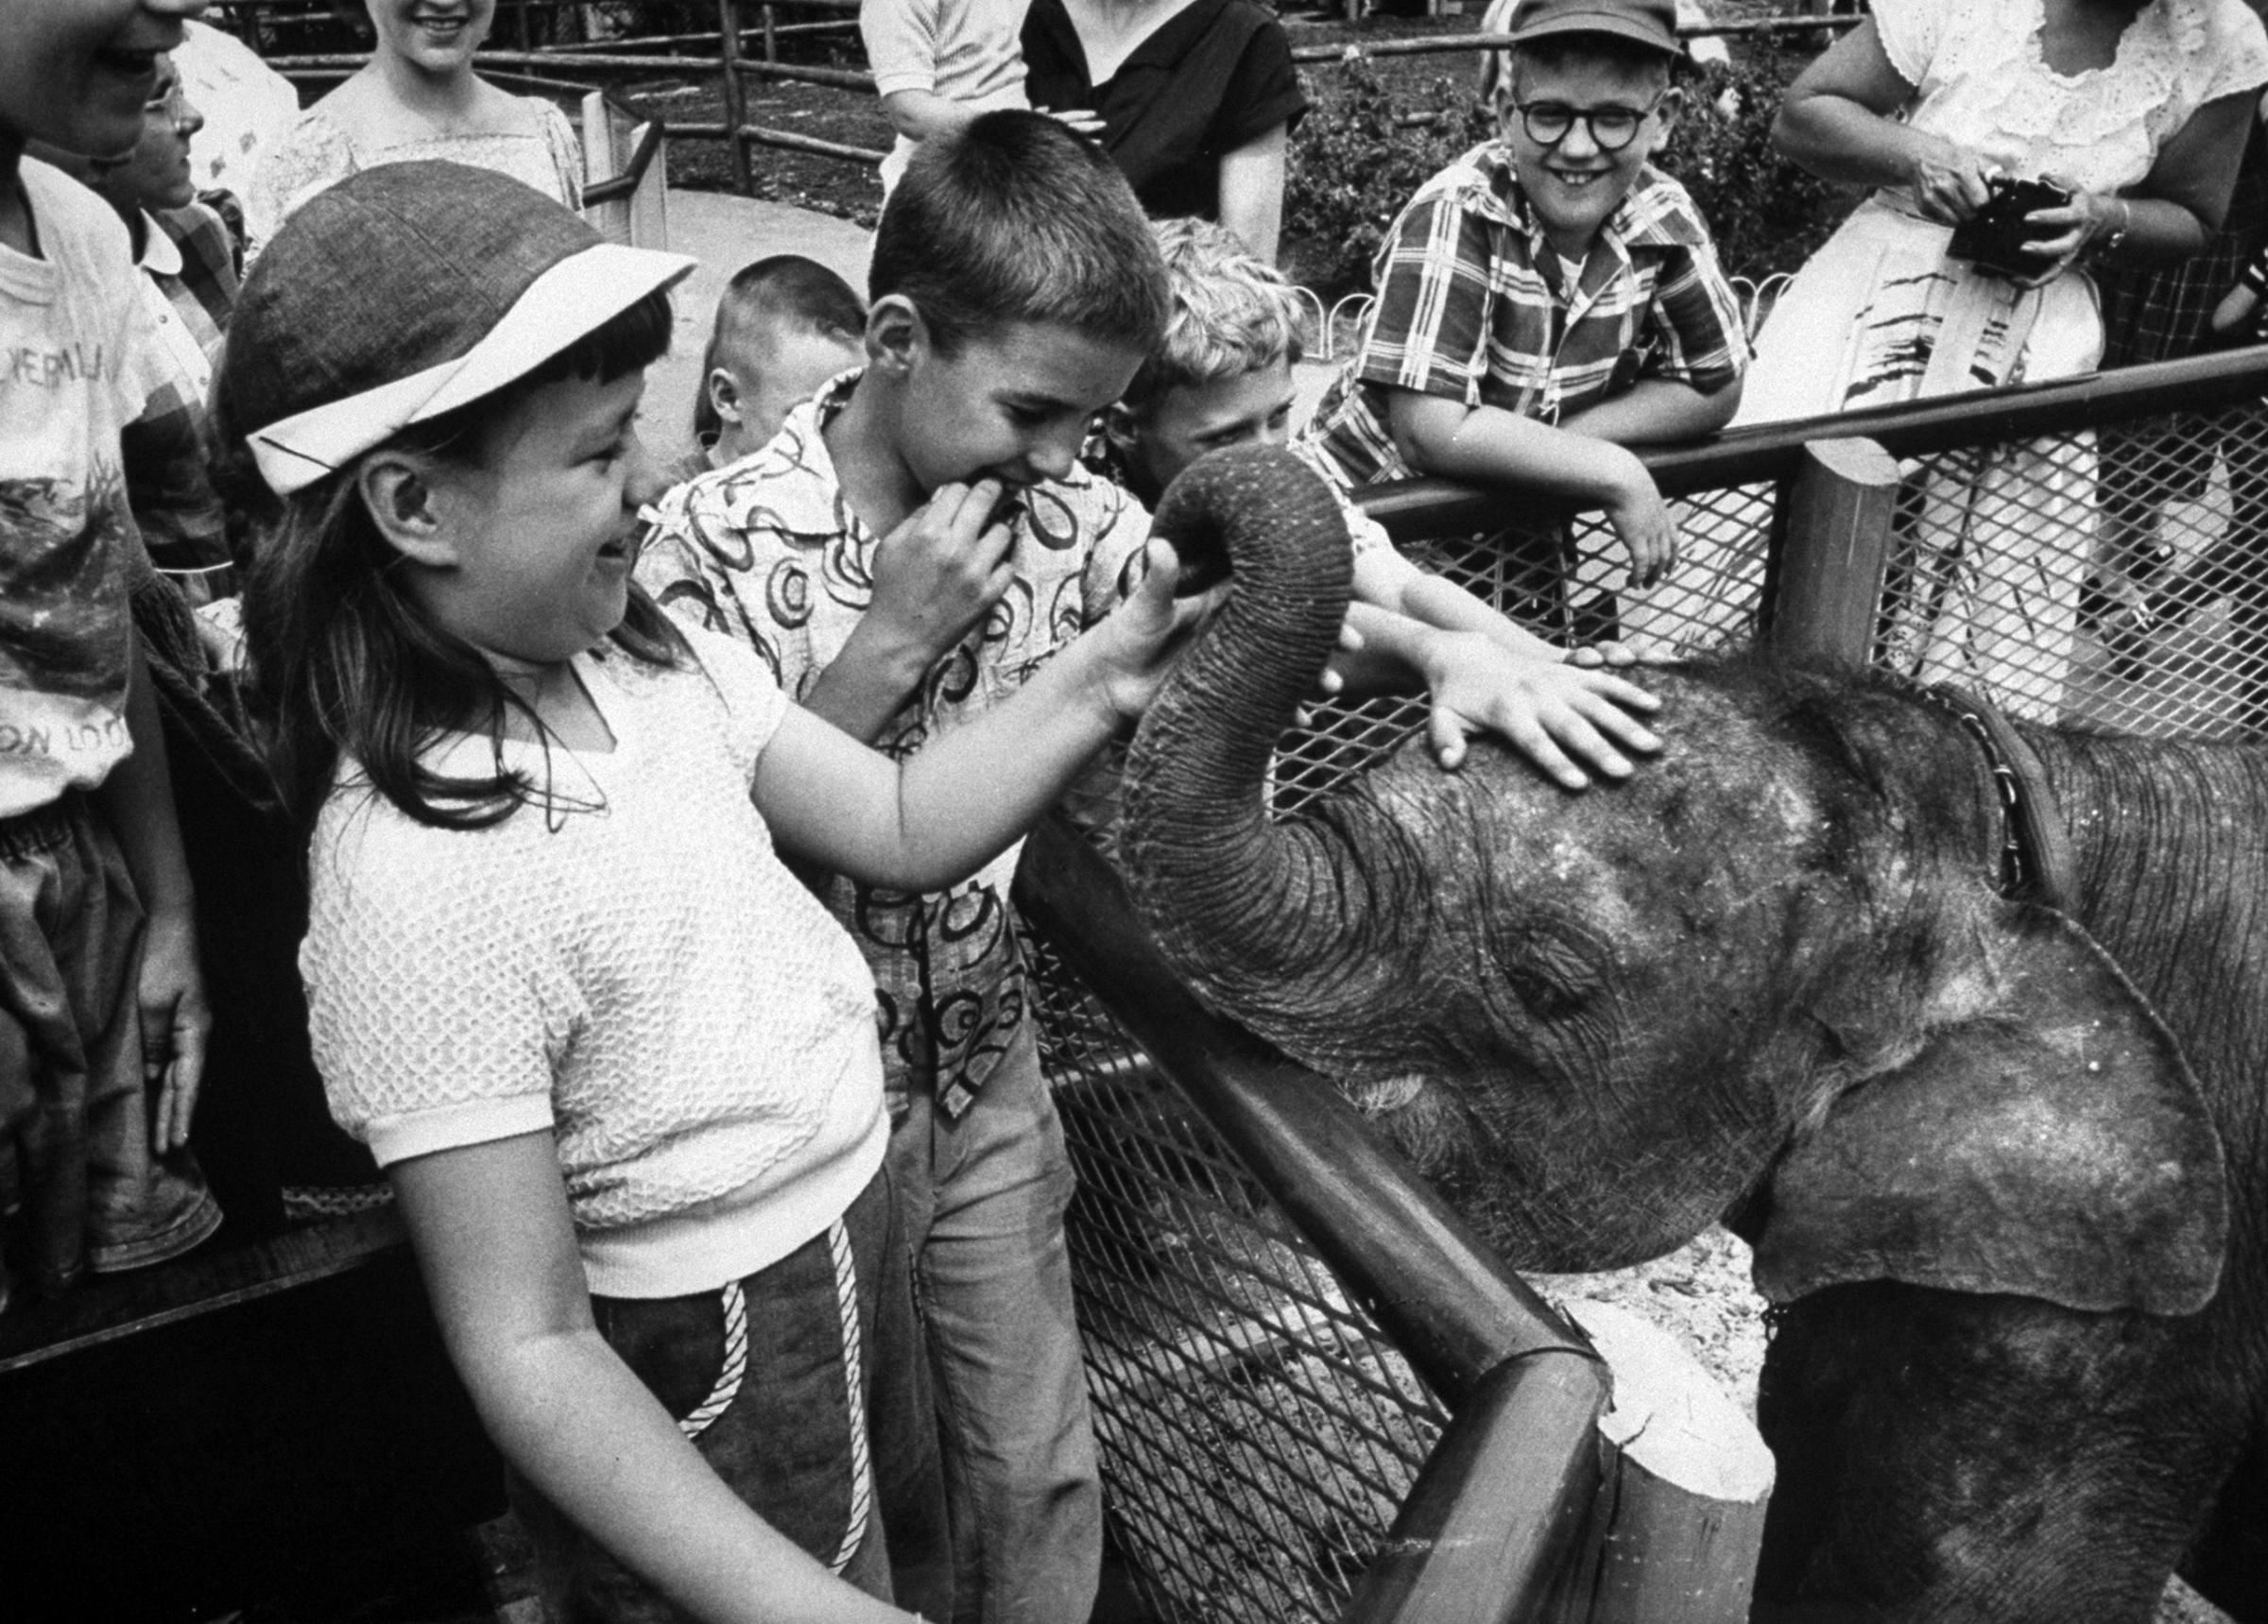 Unsuspecting elephant is worked over by the youngsters, who stood in line to give him a careful hand examination. "He feels funny," one remarked.